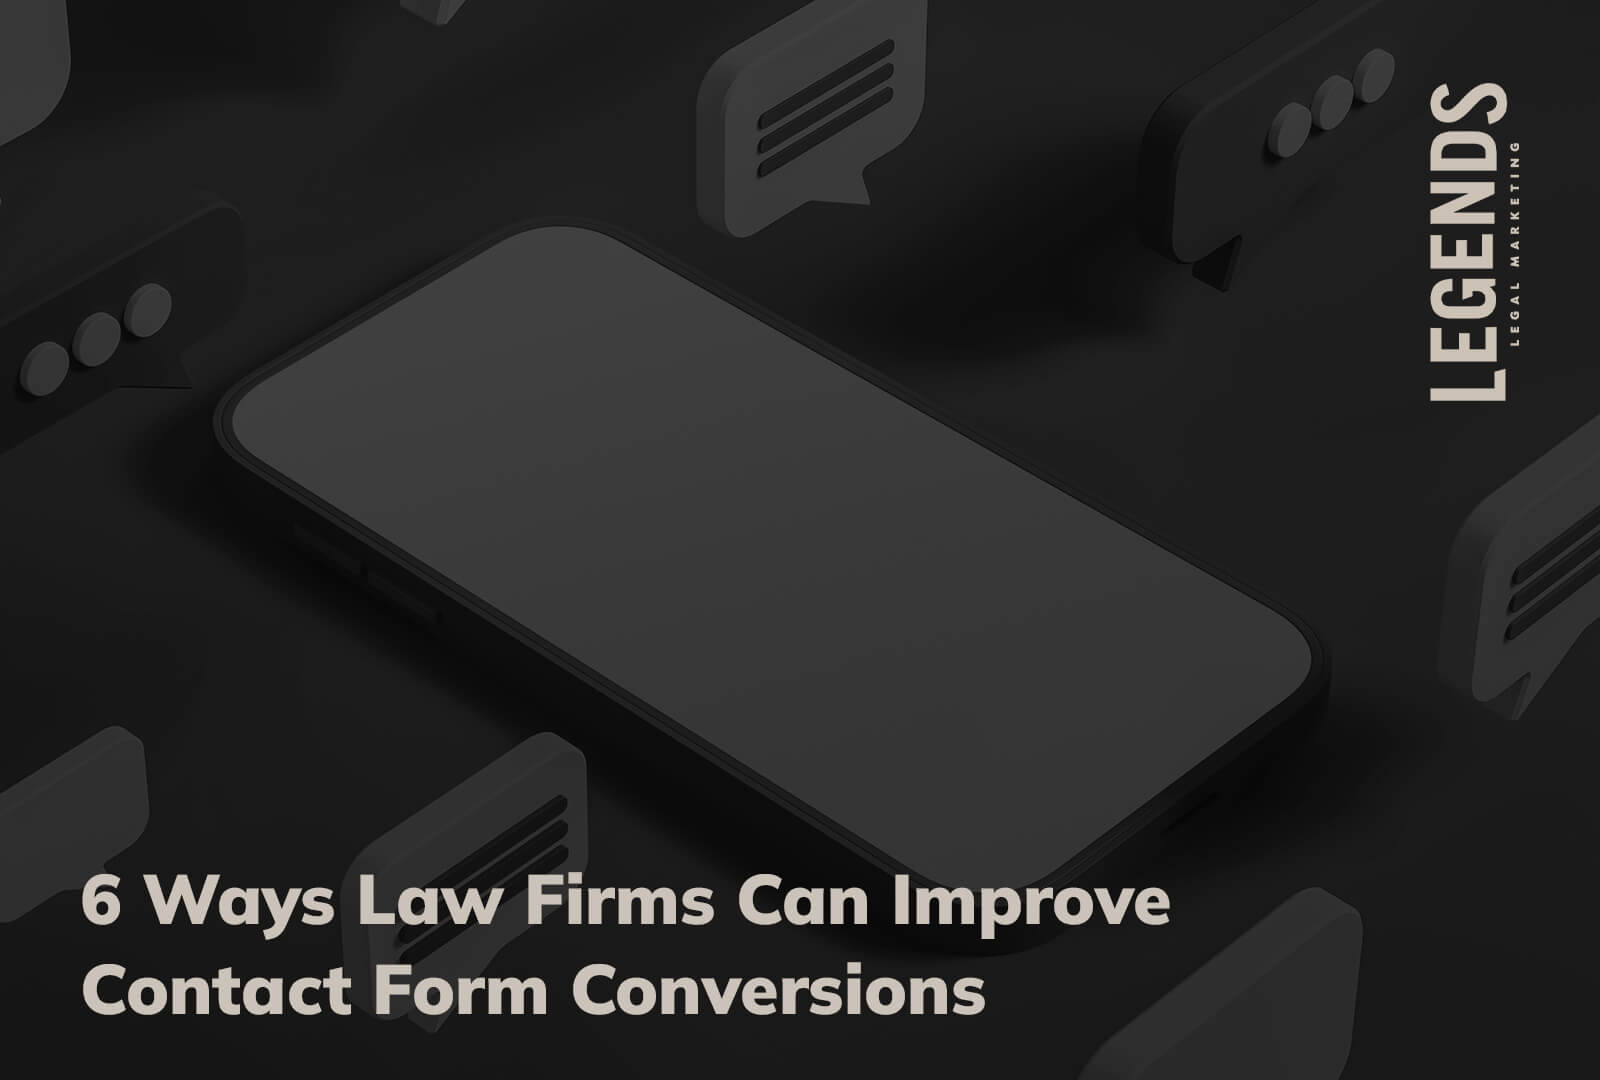 6 Ways Law Firms Can Improve Contact Form Conversions